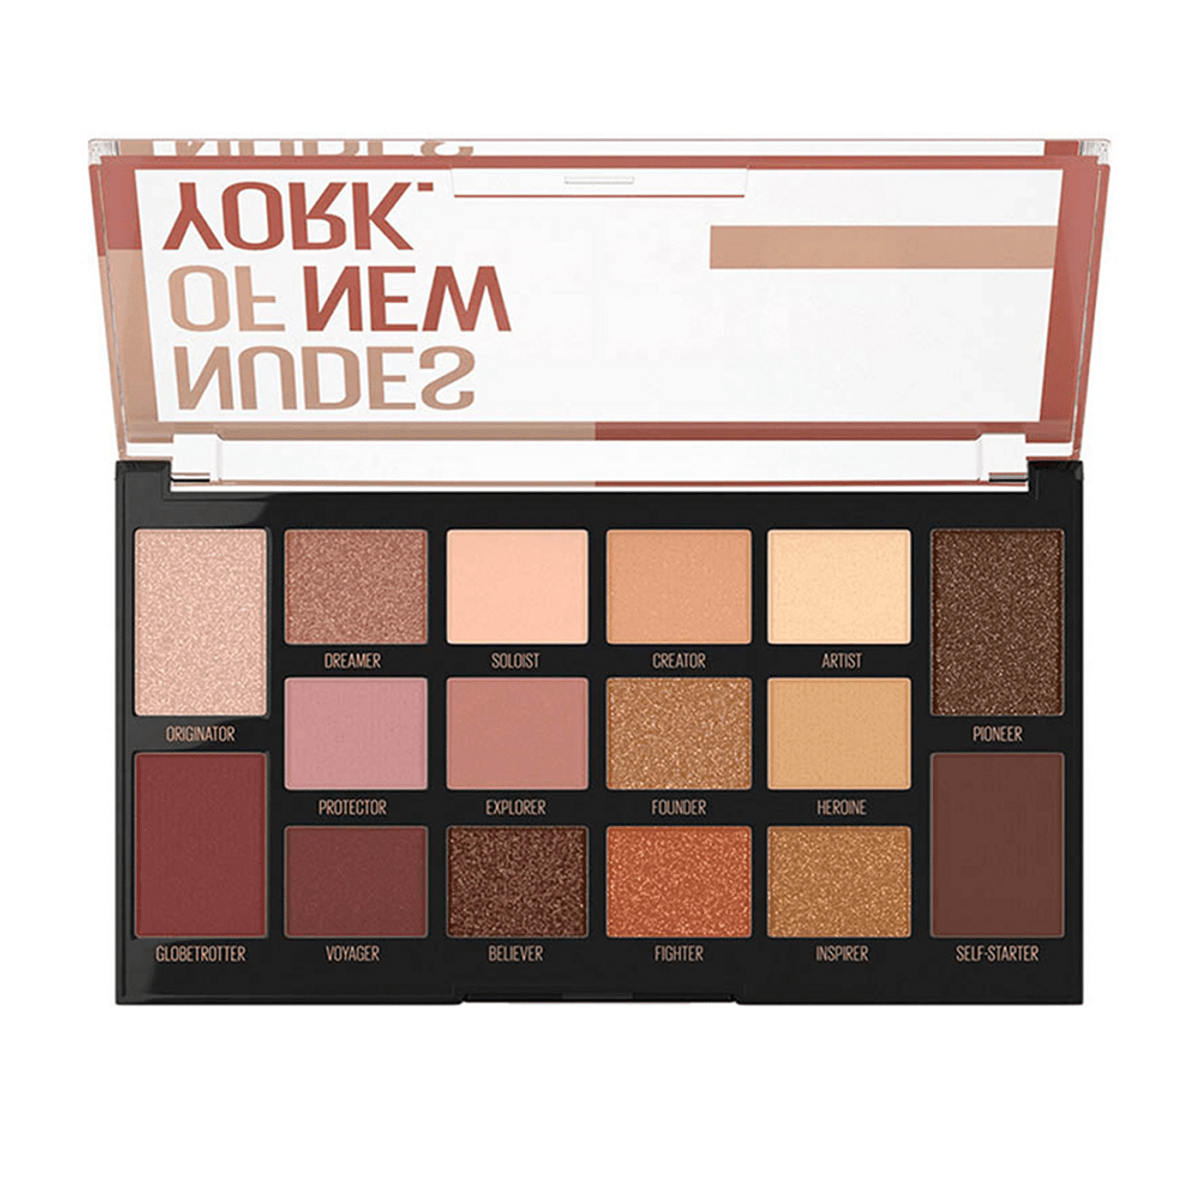 Maybelline Nudes of New York Palette